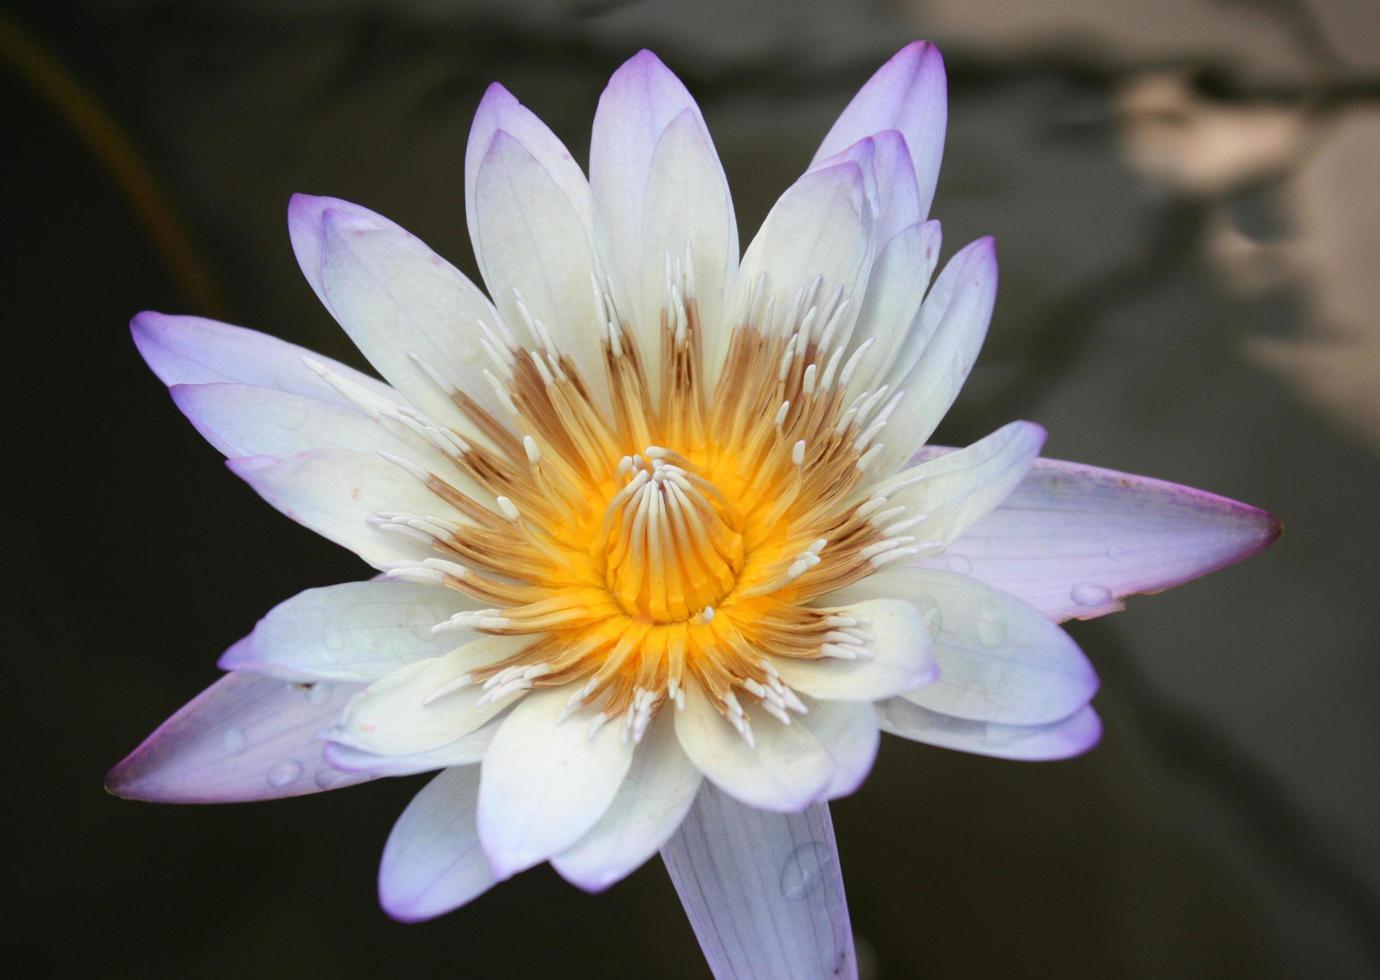 Purple and yellow lotus flower close-up photo